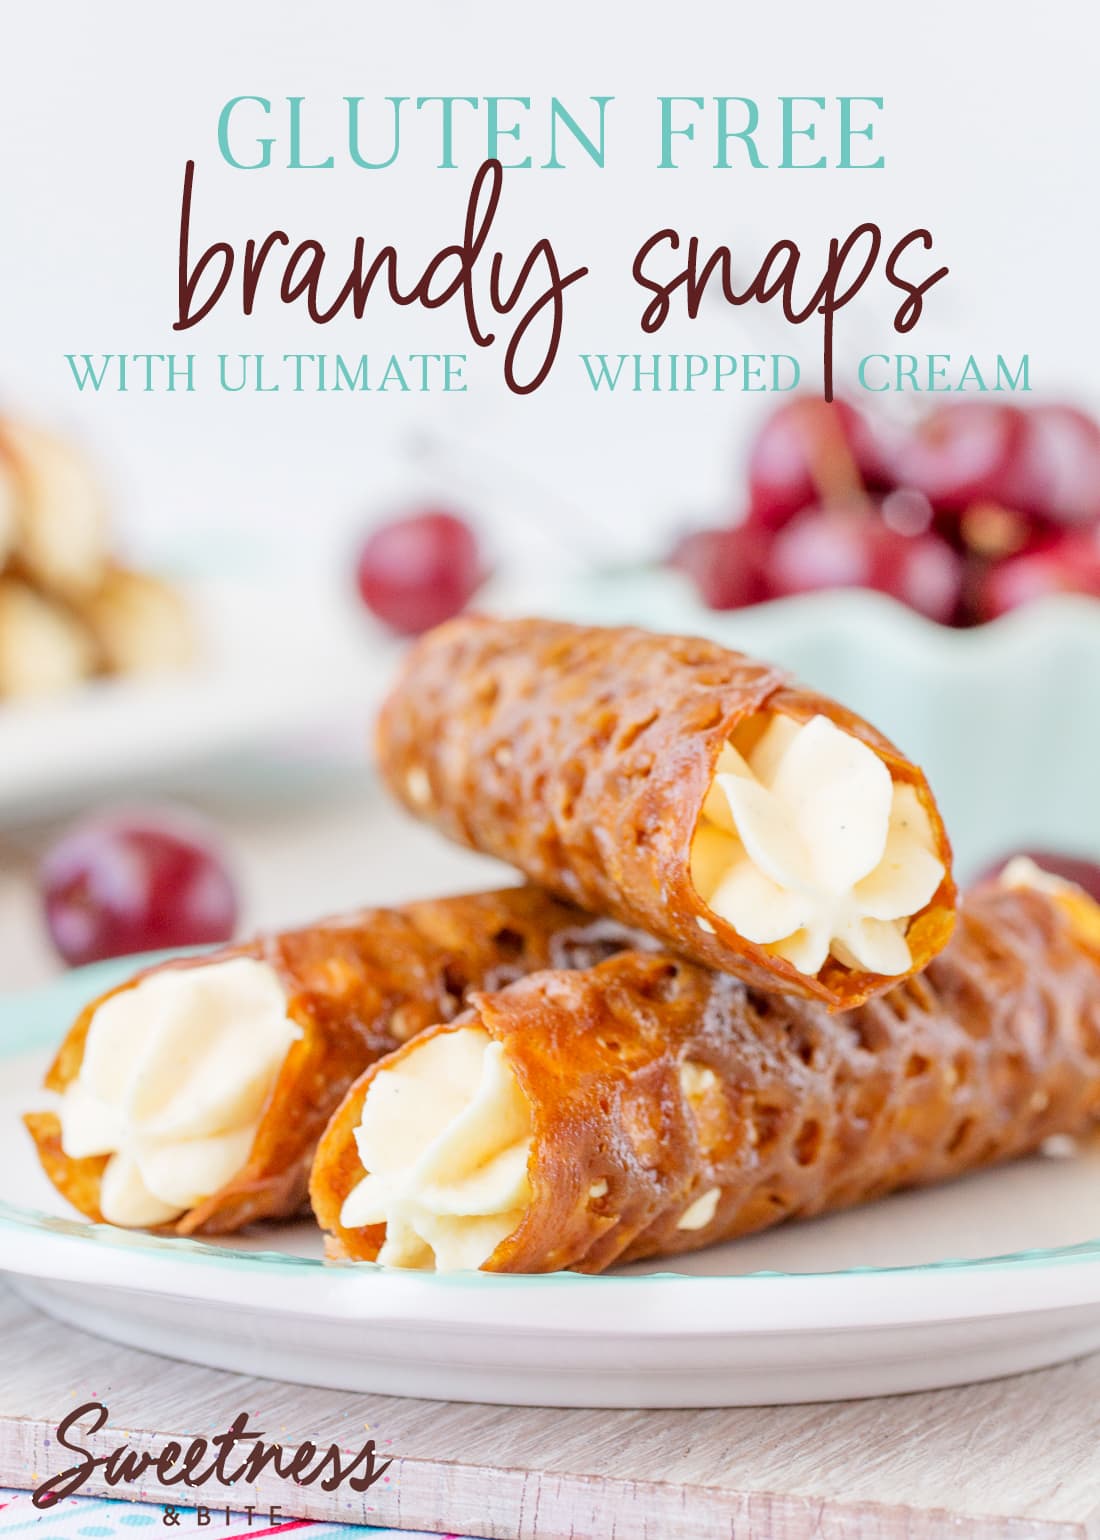 Three brandy snaps stacked on a plate, text overly reads 